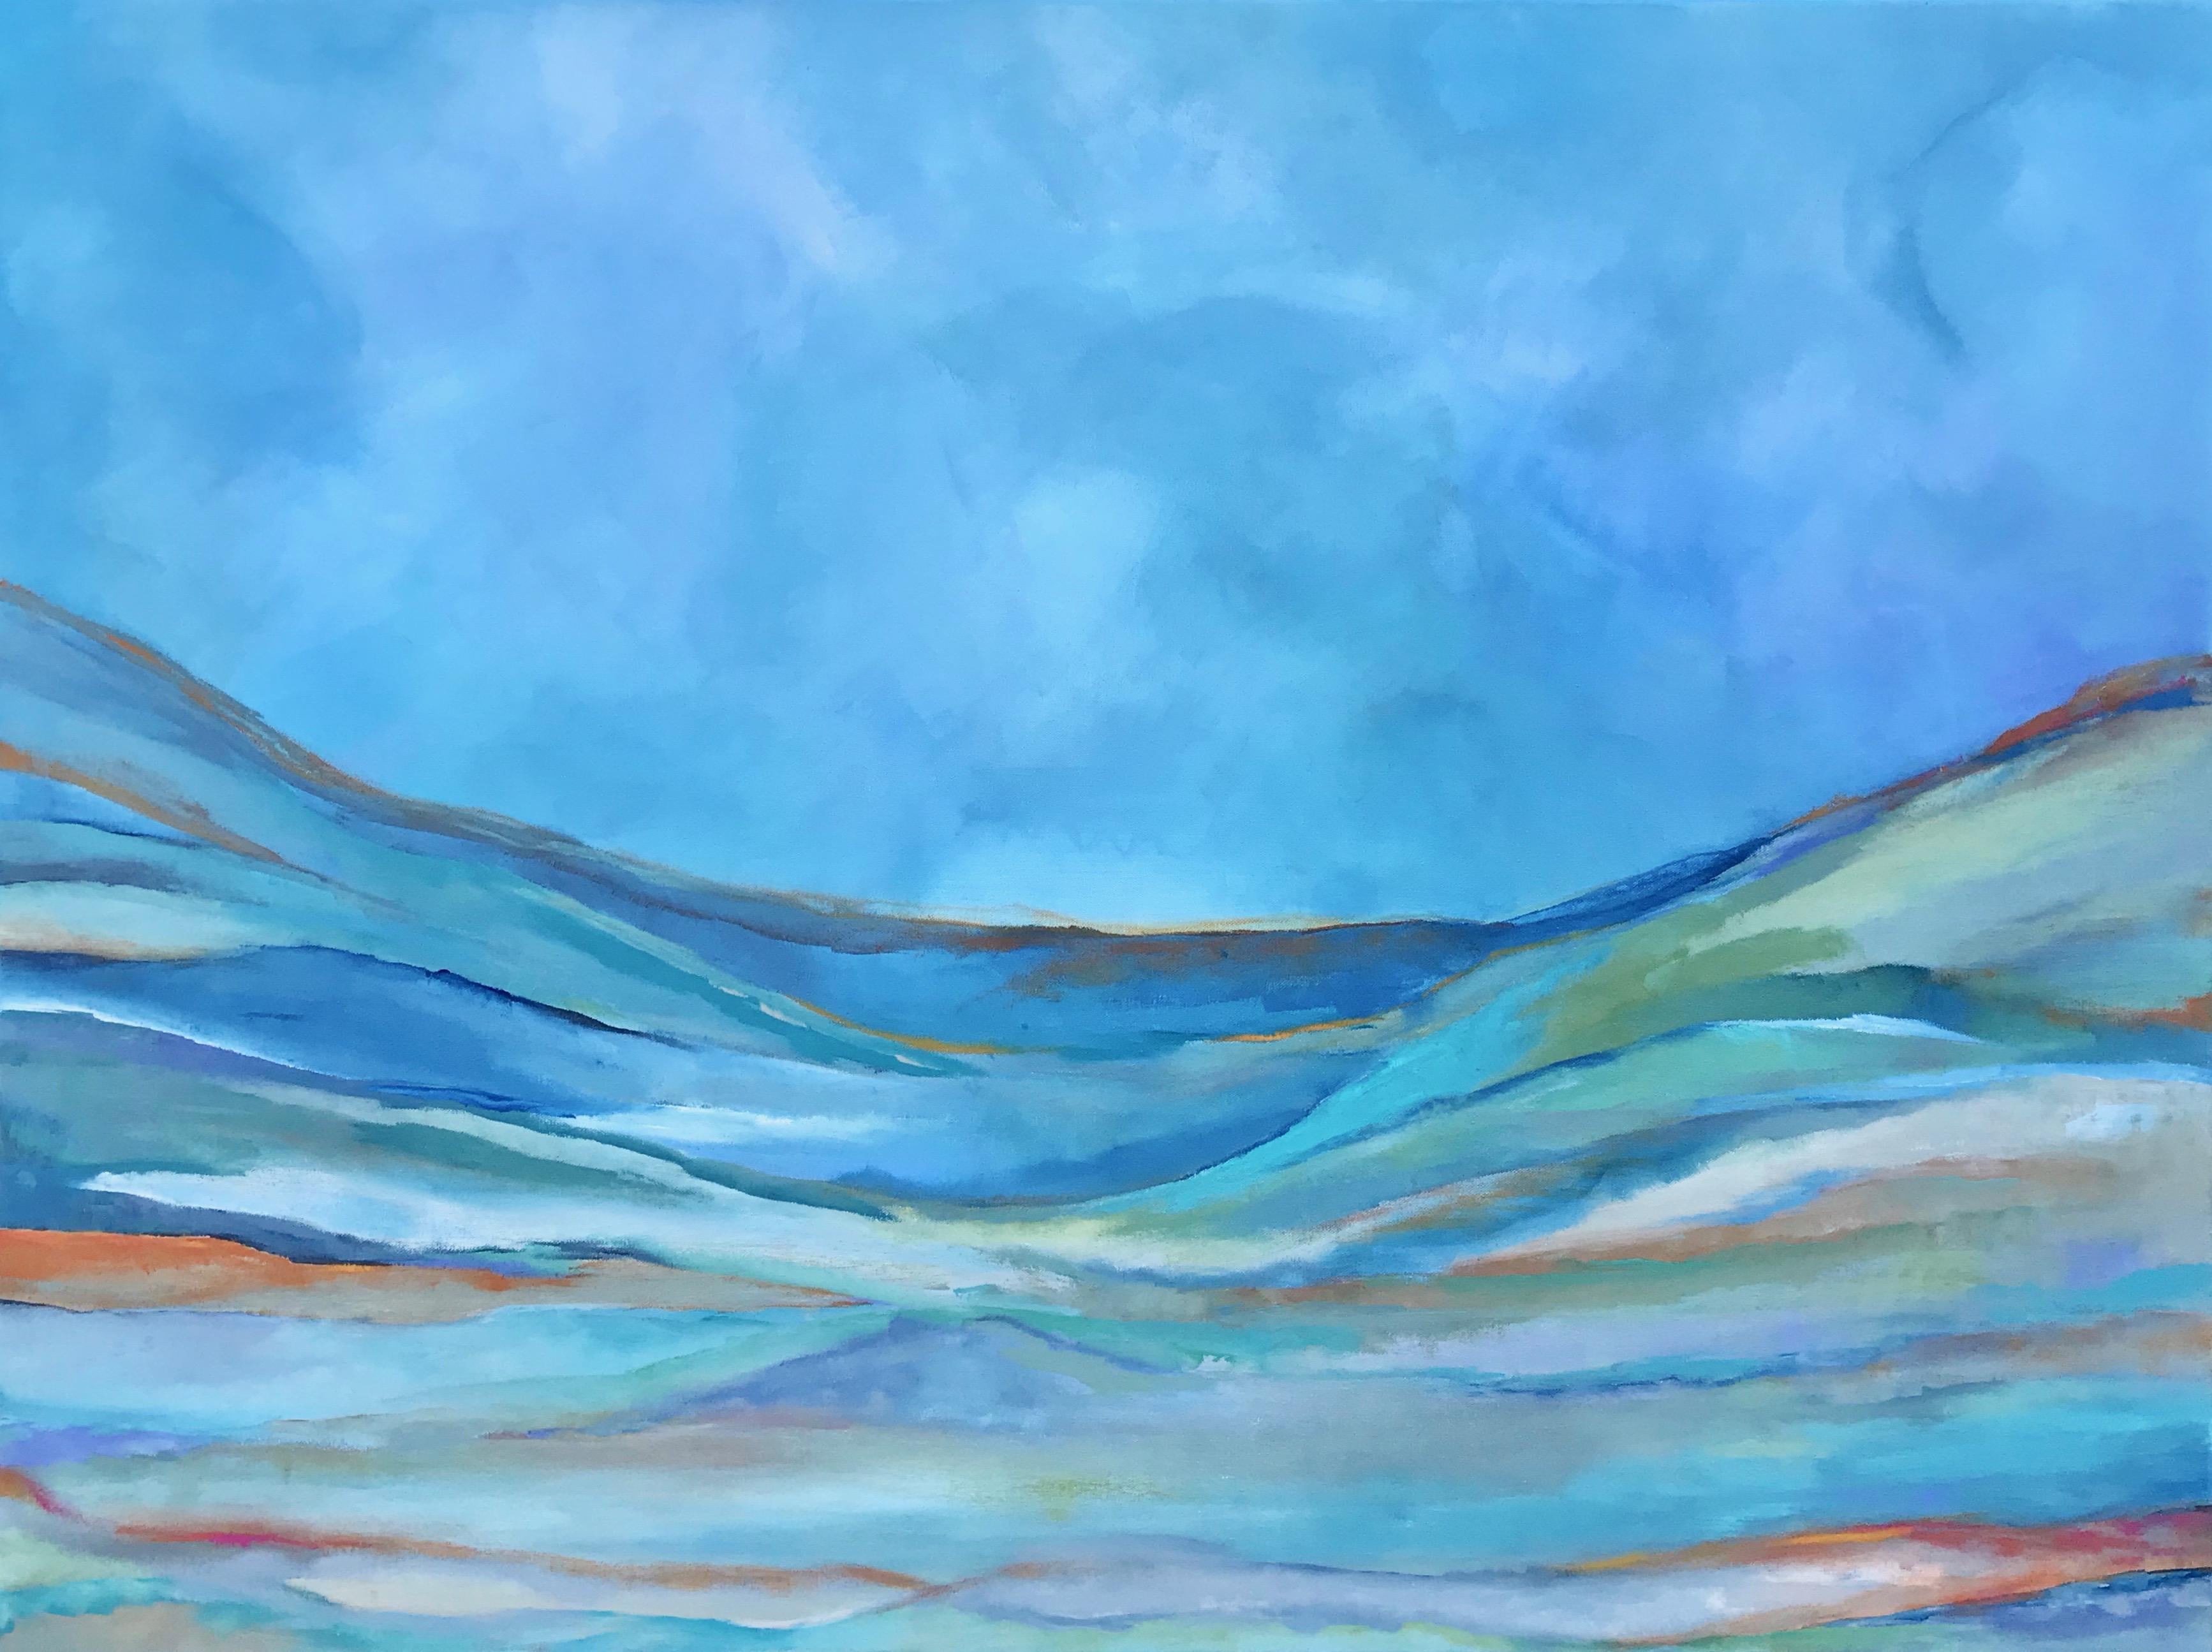 <p>Artist Comments<br>"This serene painting reminds me of floating away into a surreal dream," says Alicia. Rich rolling hills of blue, green, turquoise, orange, purple and streaks of fuchsia draw the eye up to the horizon. A hint of light radiates